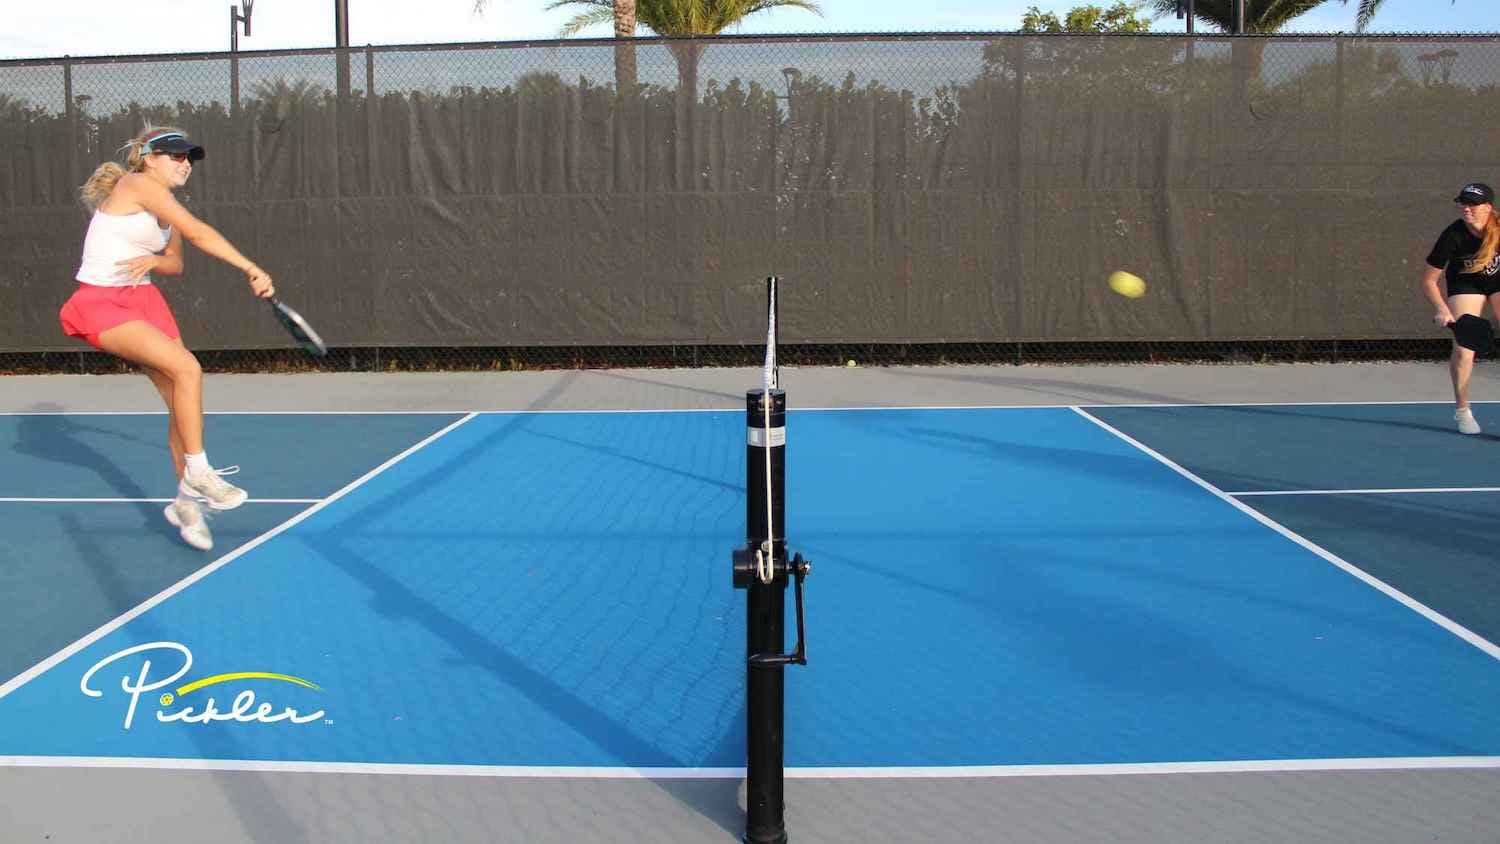 THE IMPORTANCE OF "SETTING UP THE POINT" IN PICKLEBALL & 5 TIPS FOR SUCCESS